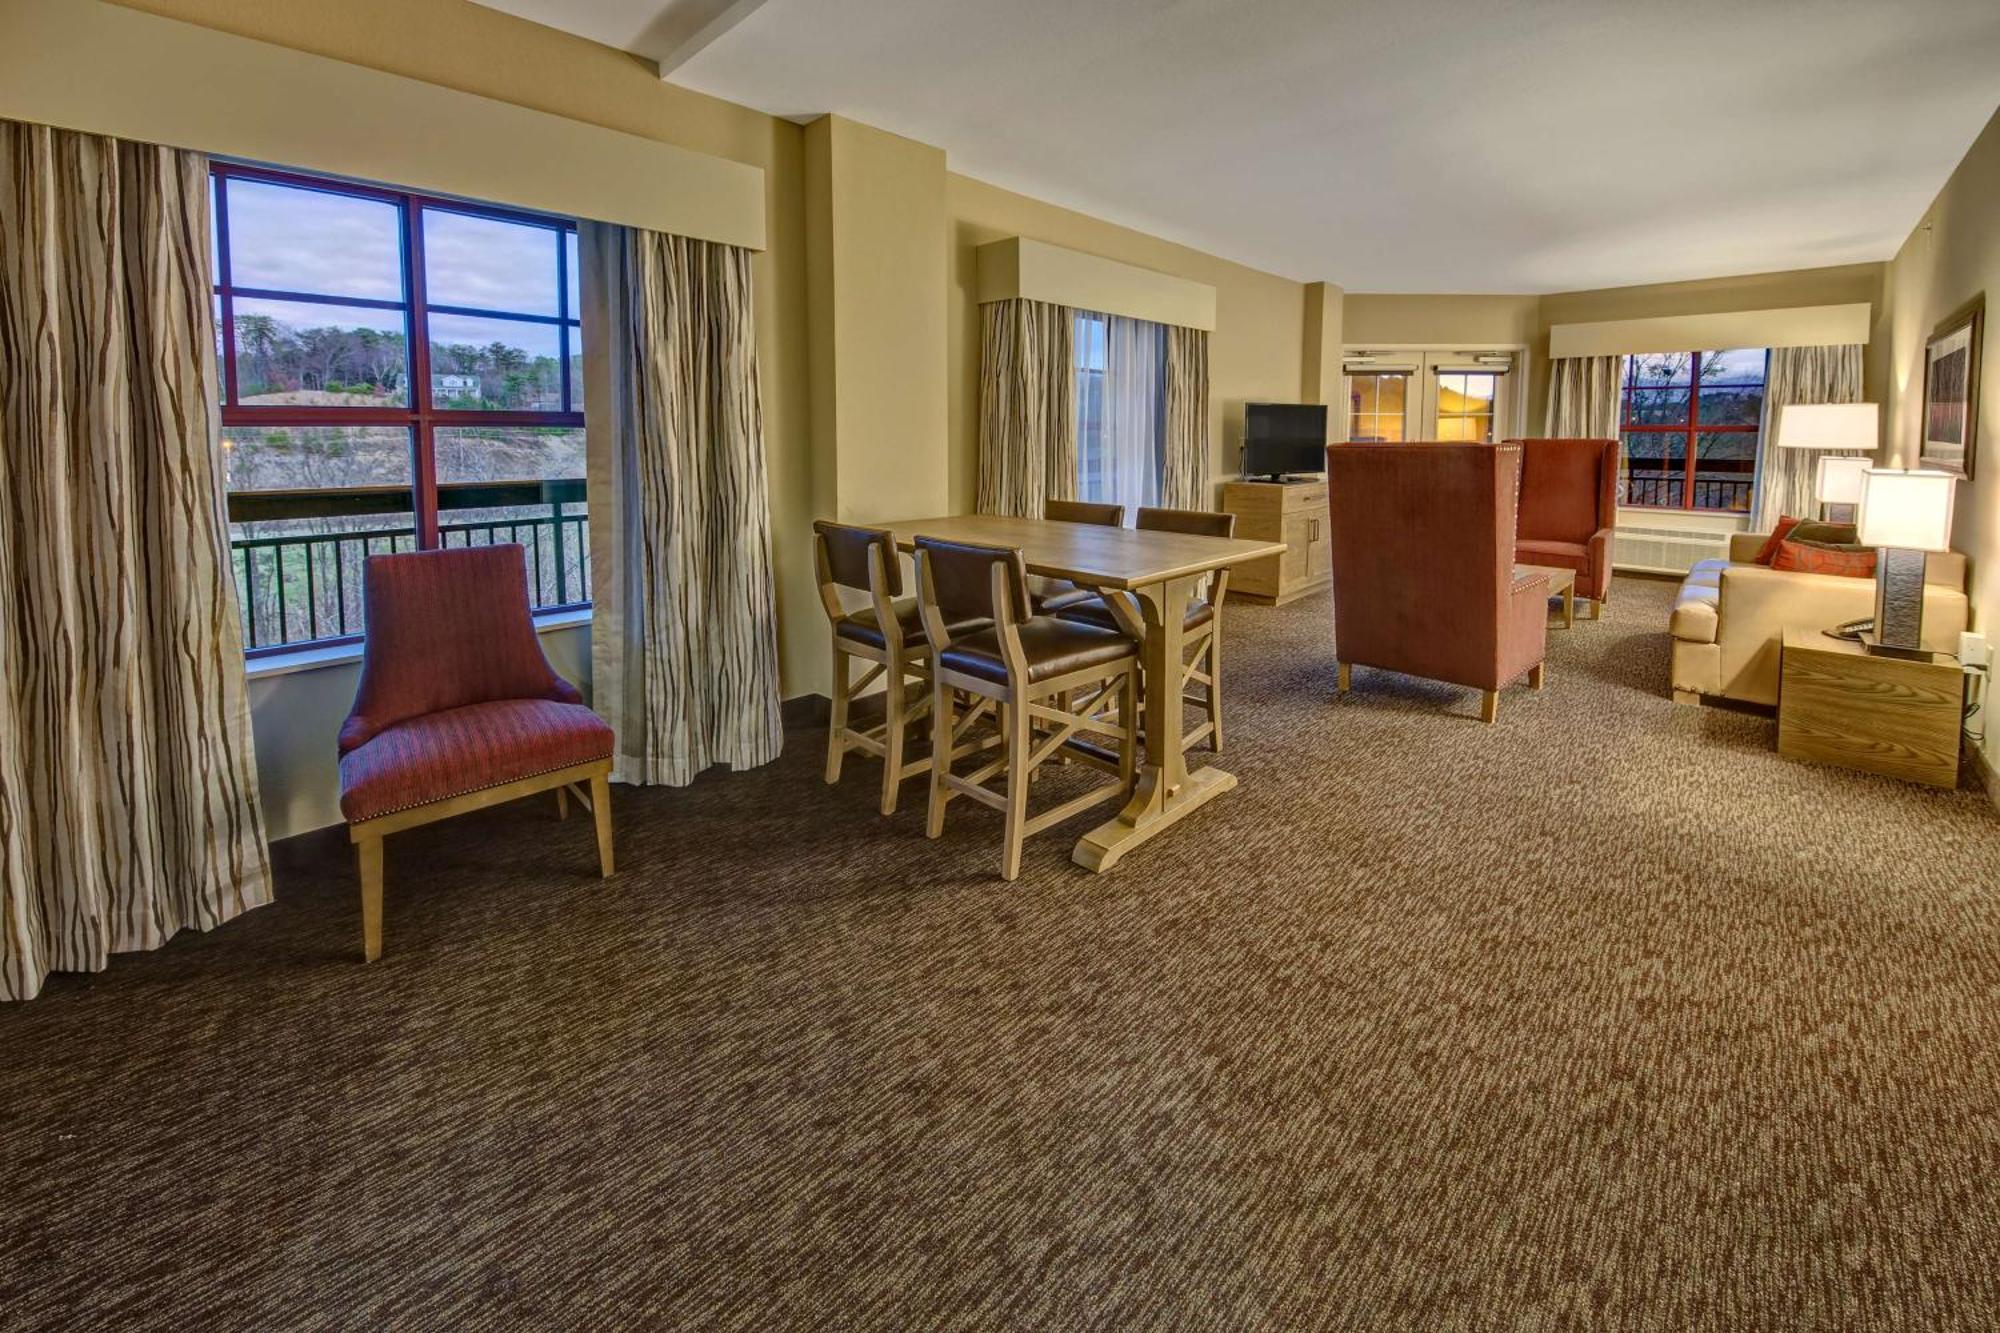 Black Fox Lodge Pigeon Forge, Tapestry Collection By Hilton Exterior photo